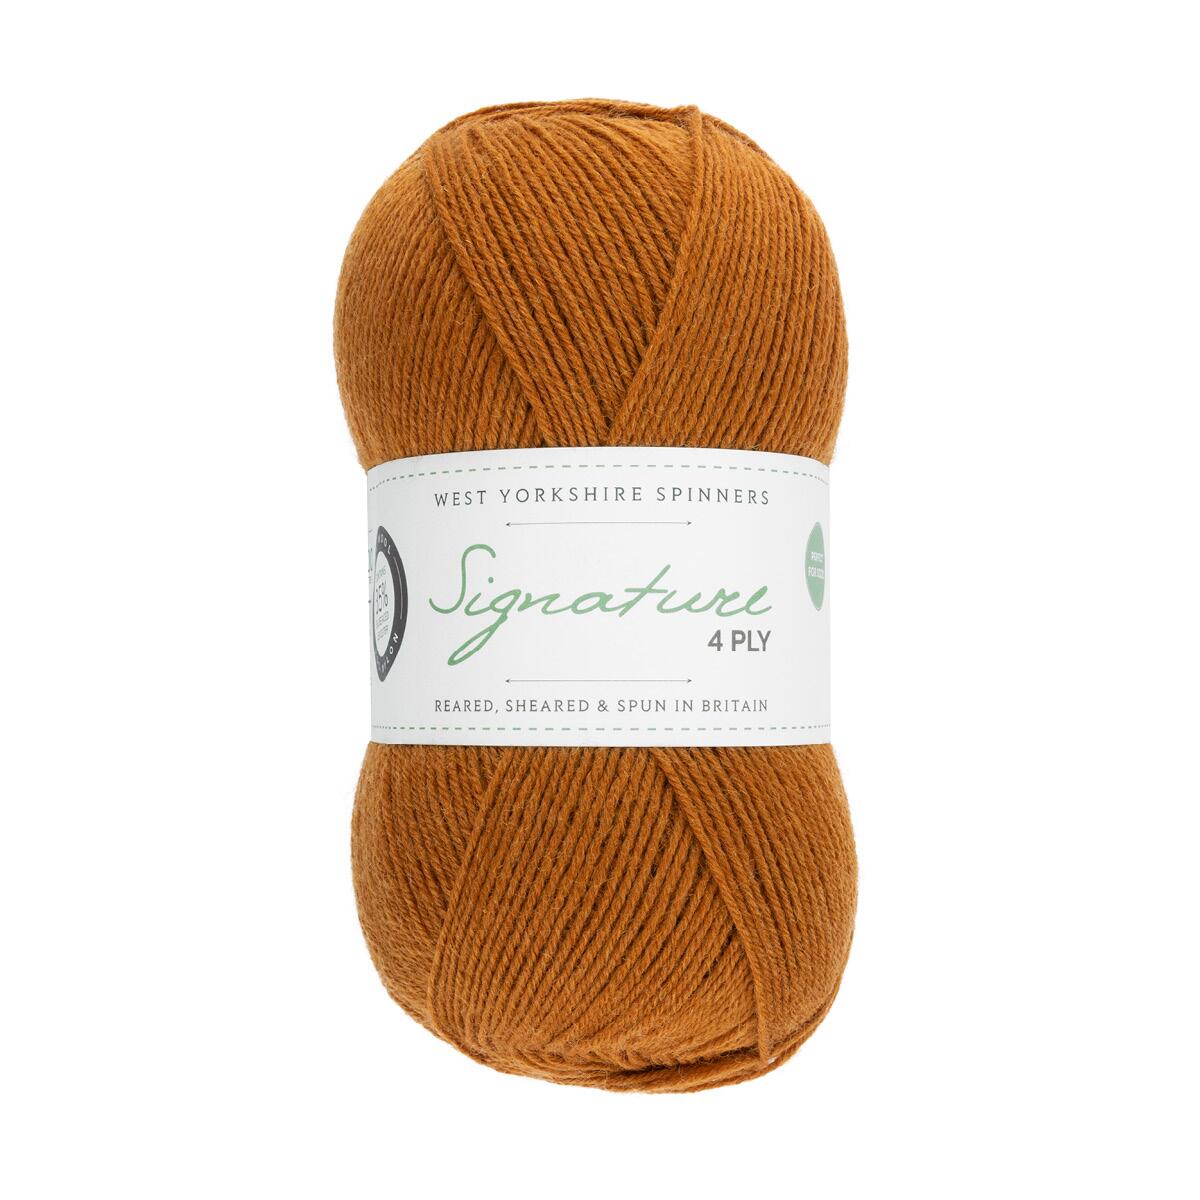 West Yorkshire Spinners Signature 4ply Unis 100g Farbe: 630 Nutmeg